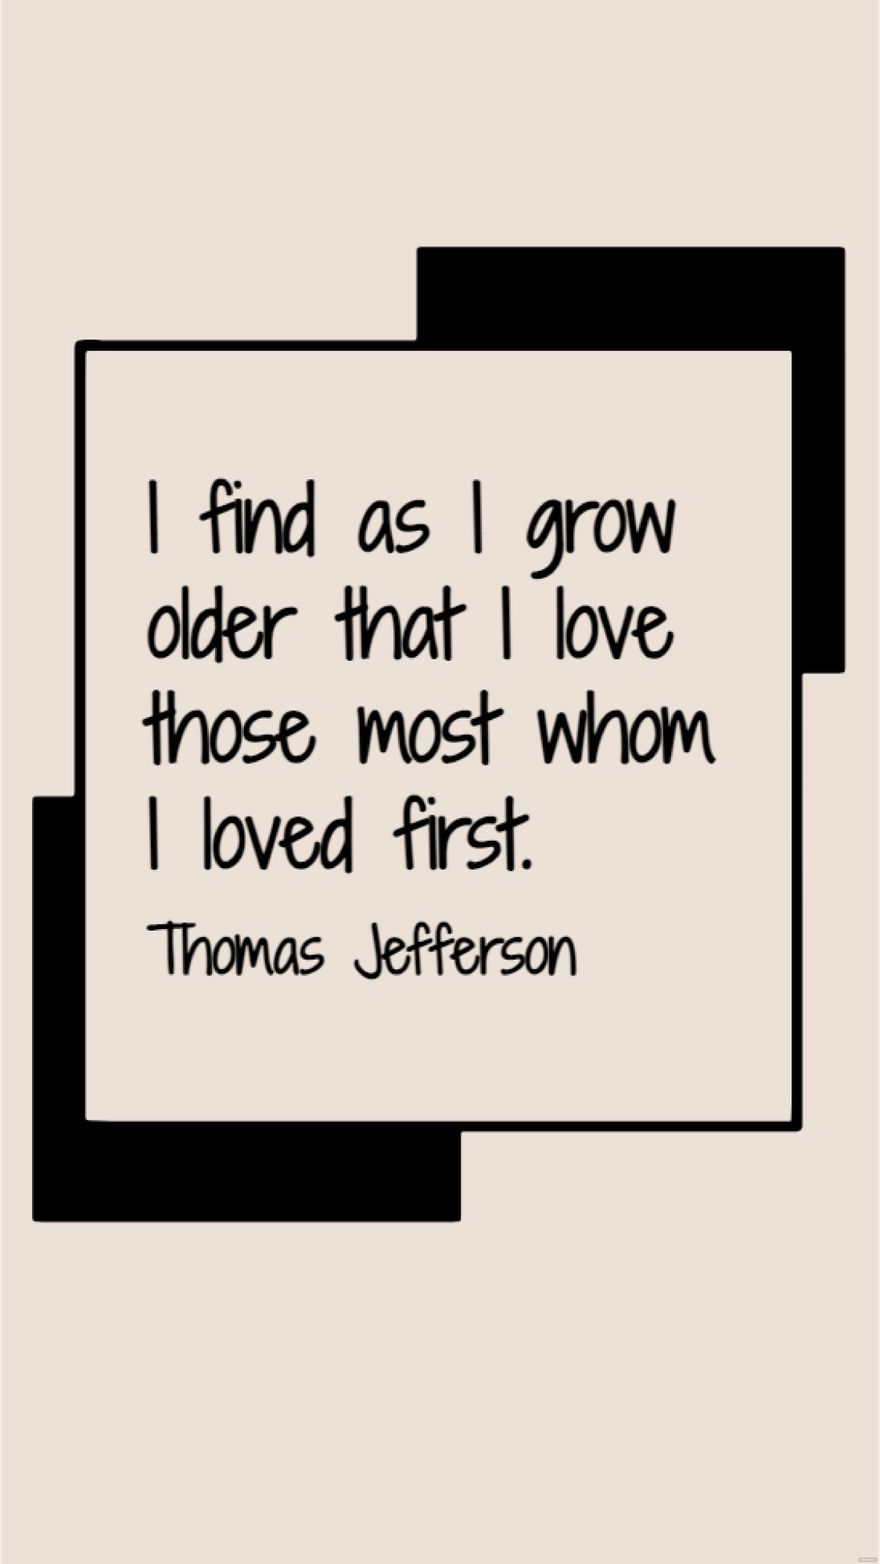 Thomas Jefferson - I find as I grow older that I love those most whom I loved first. in JPG